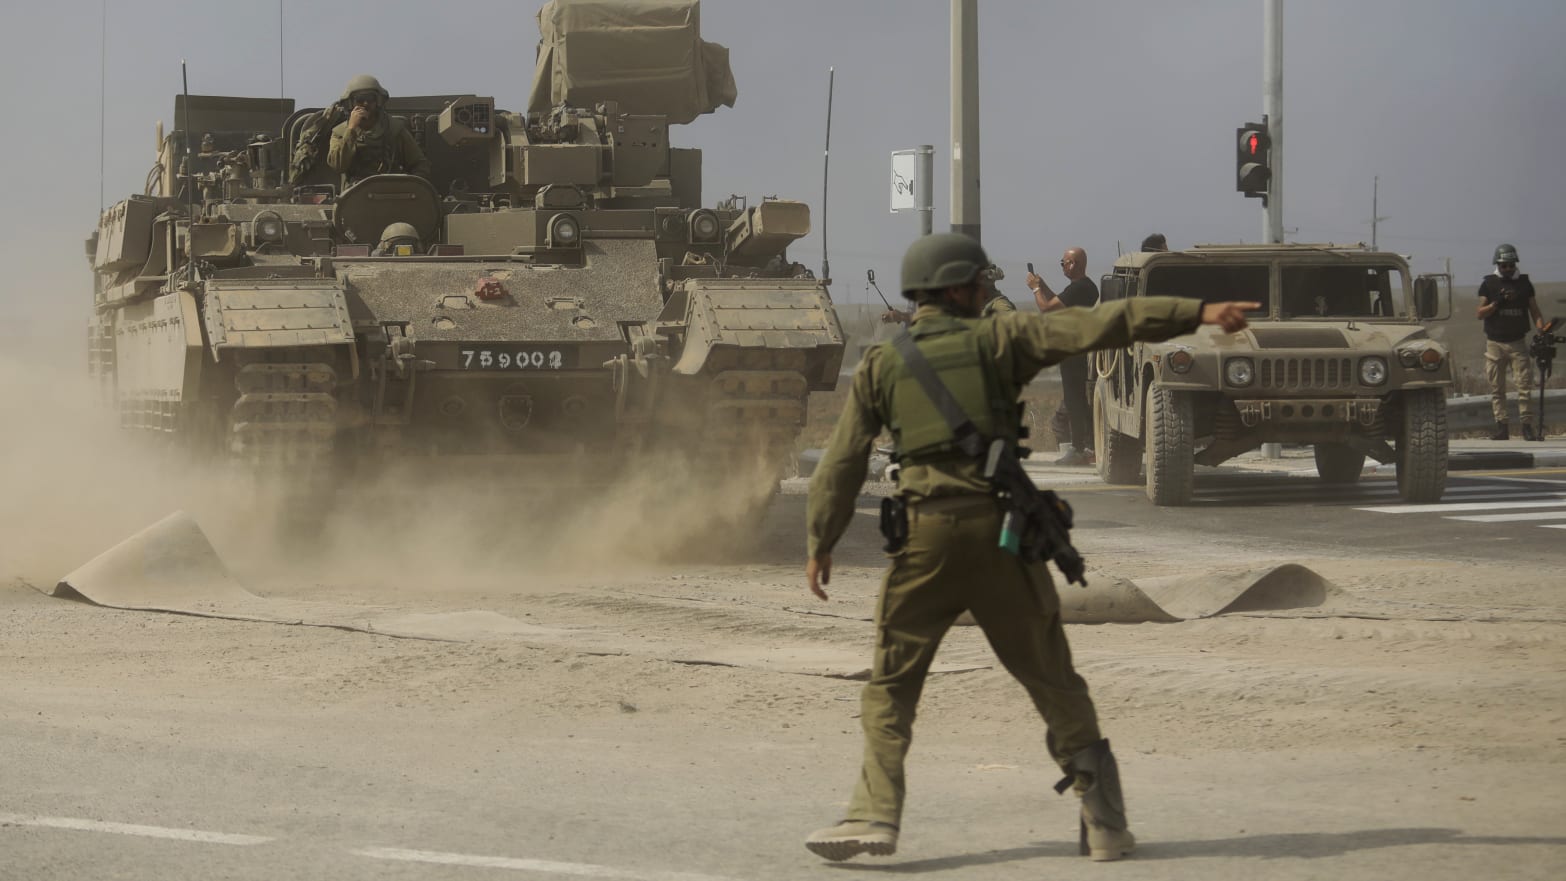 An Israeli soldier gives directions to a tank unit near the border with Gaza.